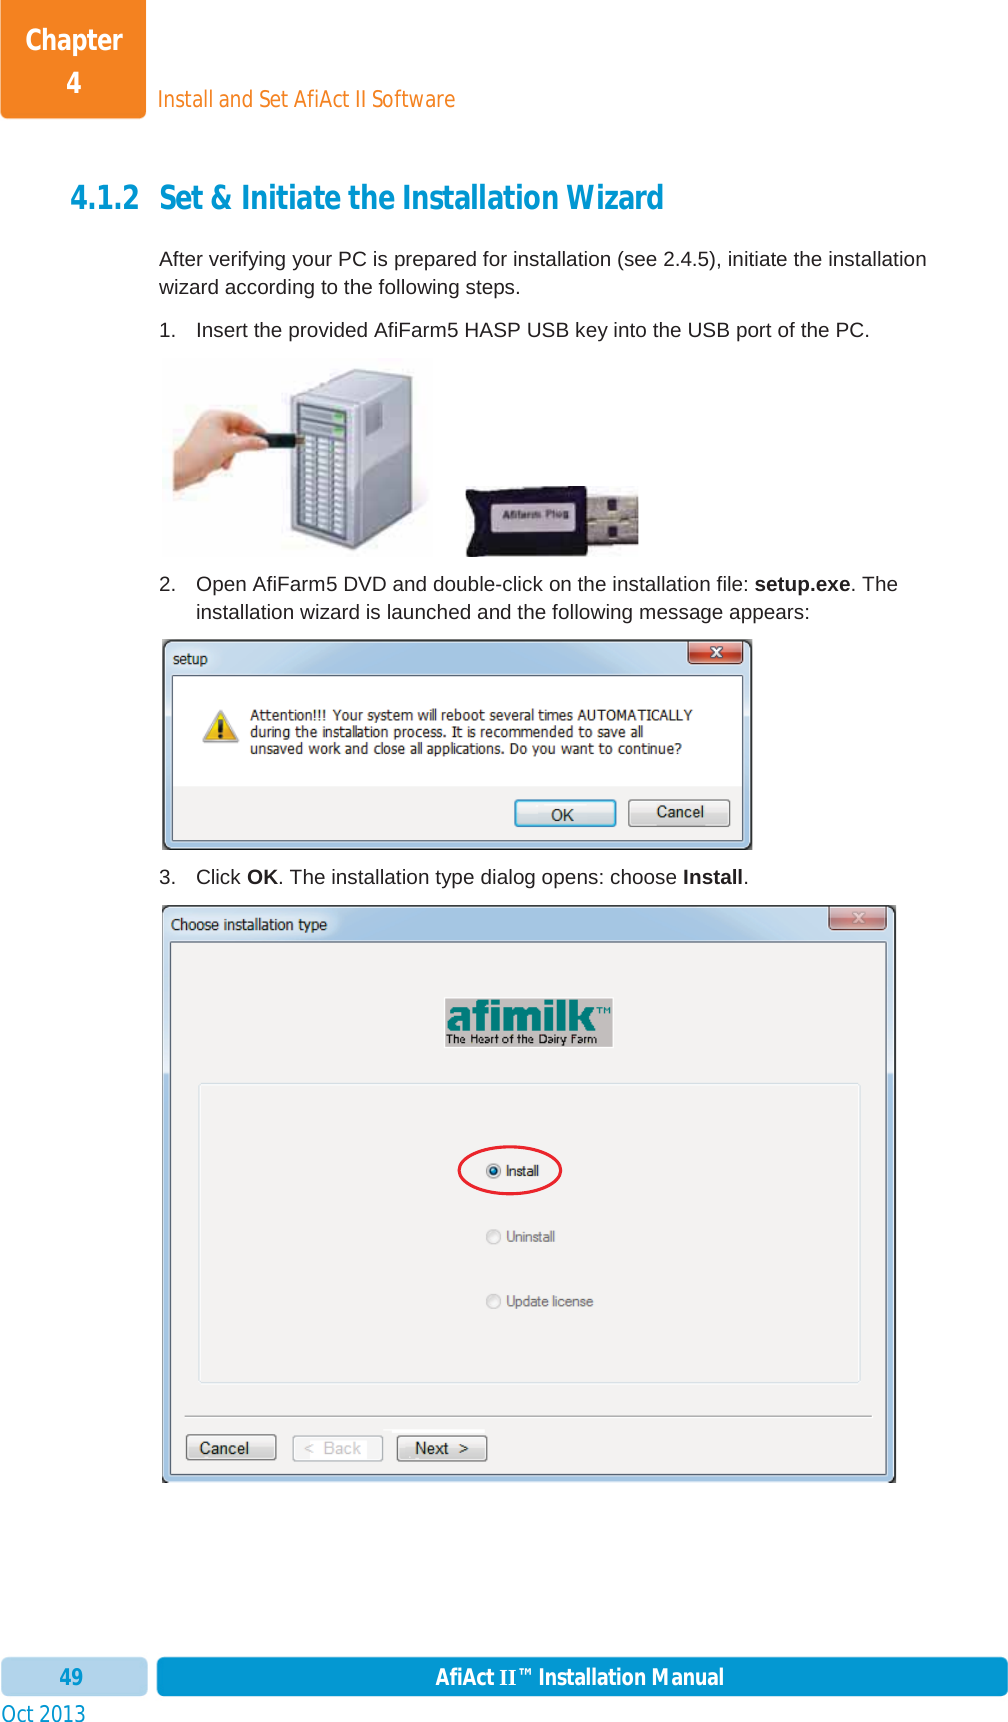 Install and Set AfiAct II SoftwareChapter 4Oct 2013 AfiAct II™ Installation Manual494.1.2 Set &amp; Initiate the Installation Wizard After verifying your PC is prepared for installation (see  2.4.5), initiate the installation wizard according to the following steps. 1.  Insert the provided AfiFarm5 HASP USB key into the USB port of the PC.        2.  Open AfiFarm5 DVD and double-click on the installation file: setup.exe. The installation wizard is launched and the following message appears: 3. Click OK. The installation type dialog opens: choose Install.